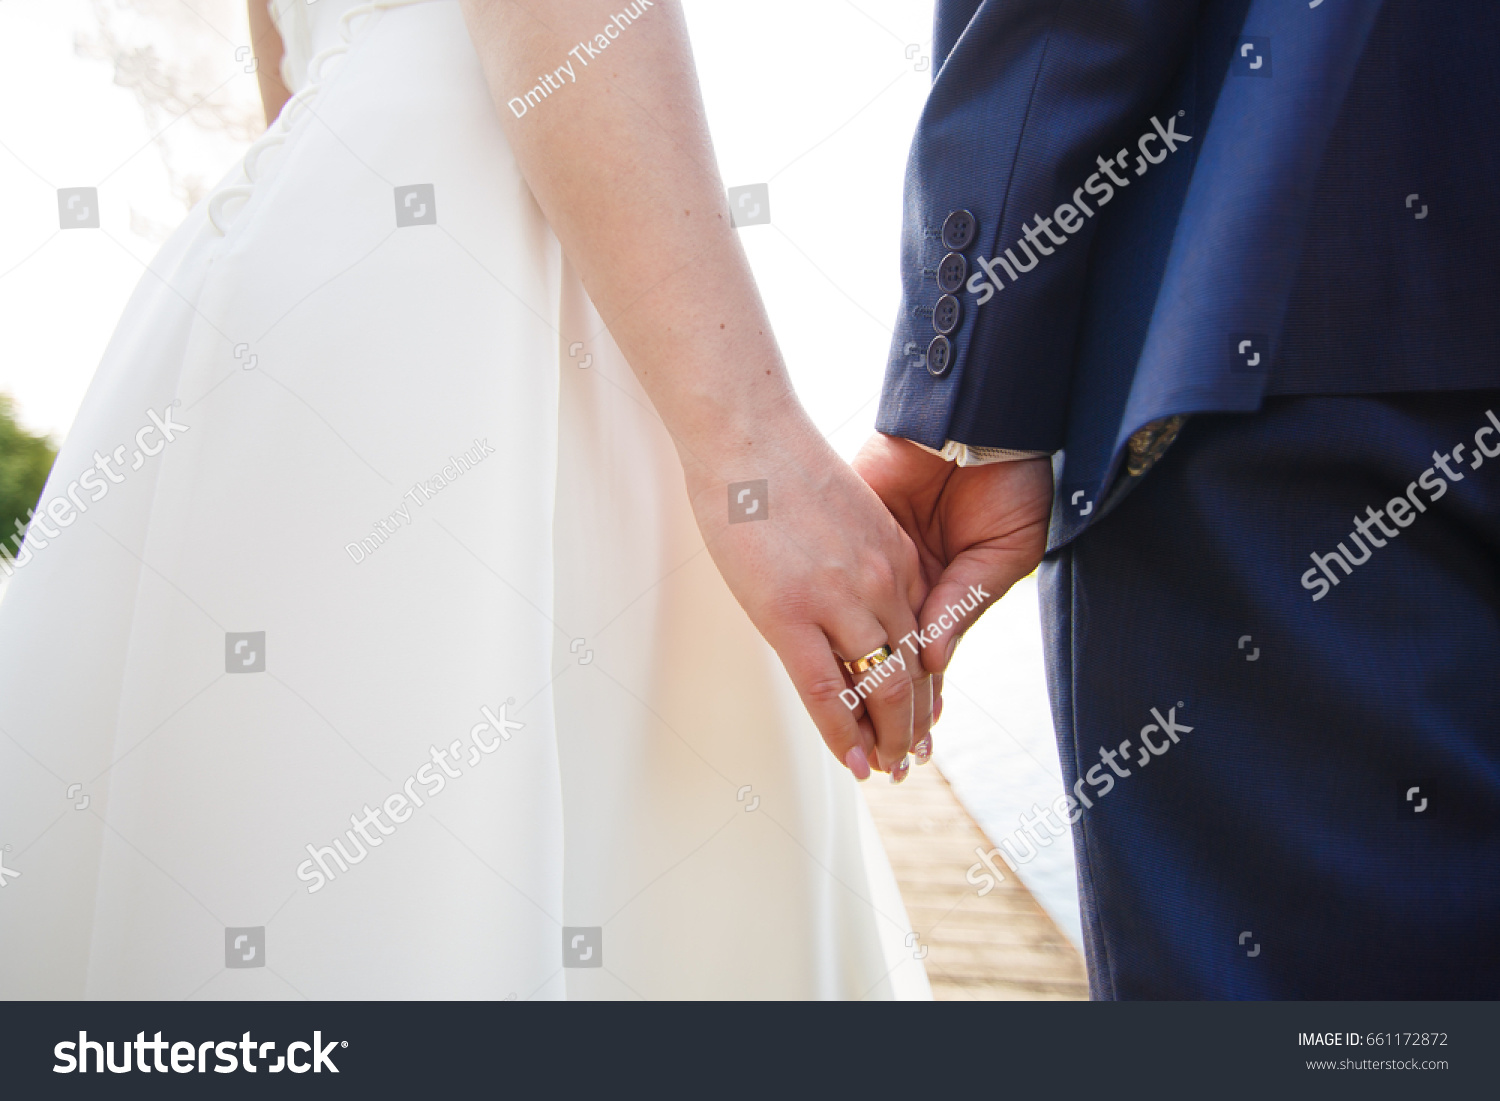 Newly married gently hold hands #661172872